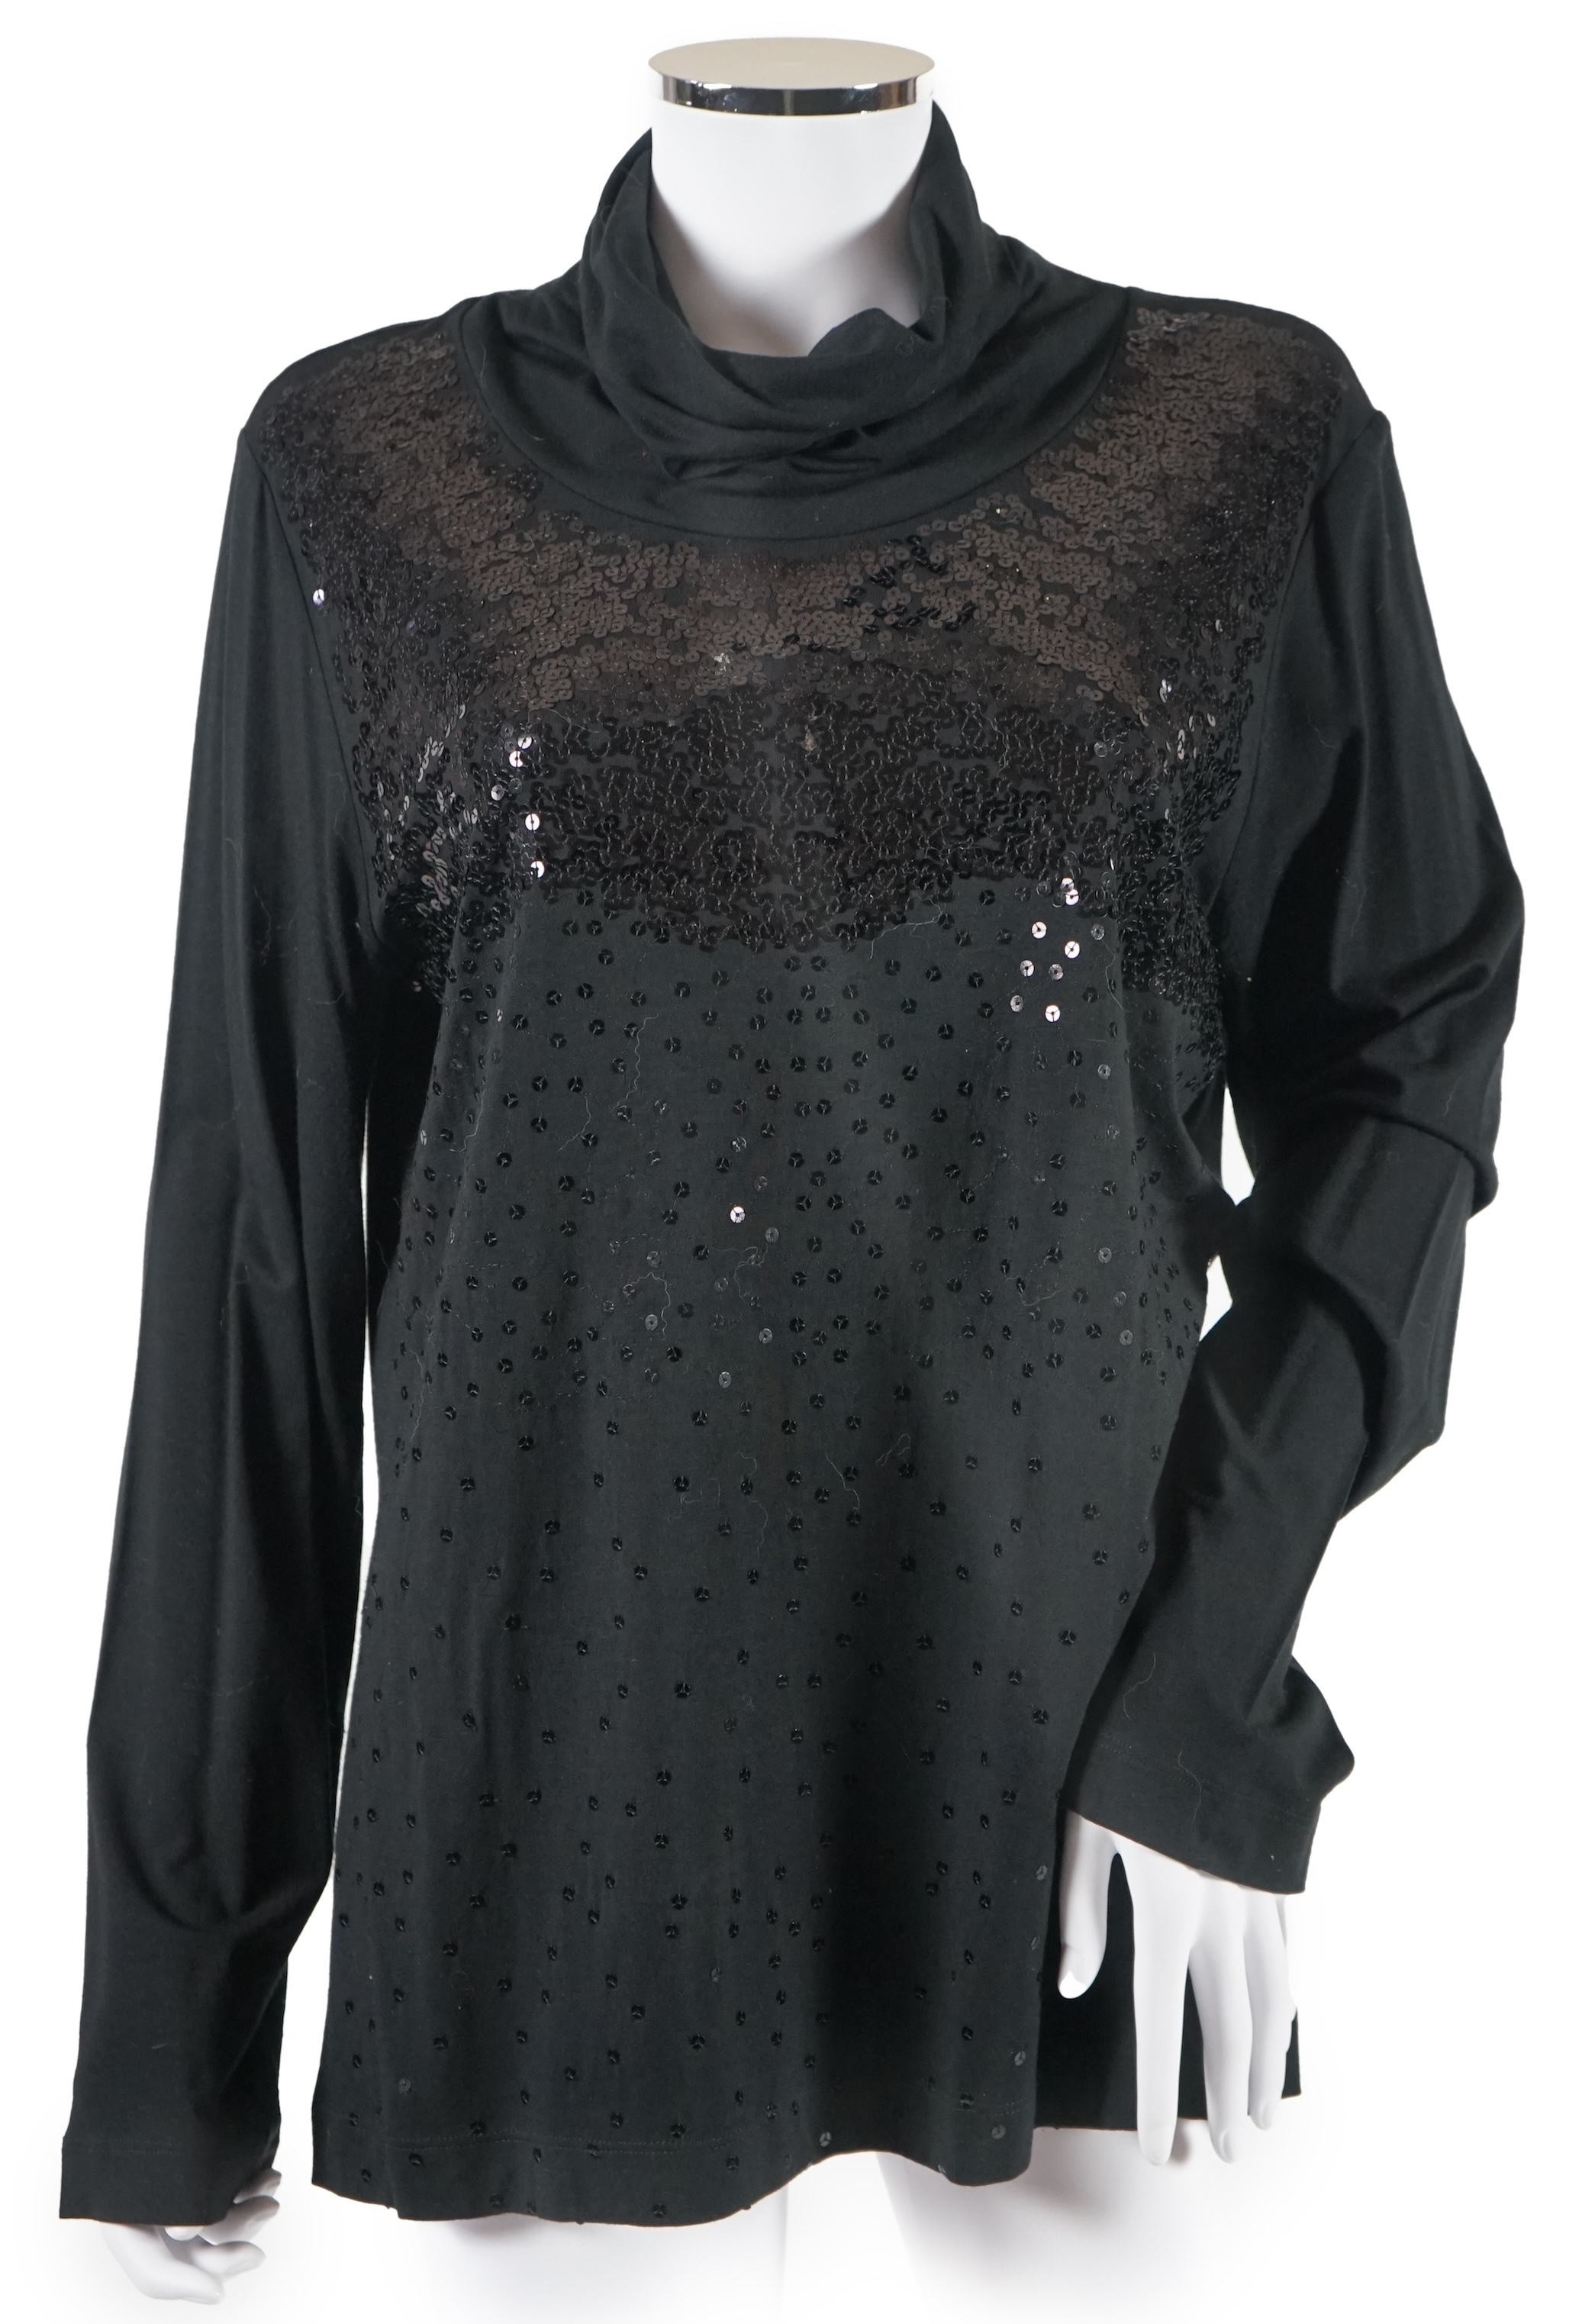 A selection of lady's evening tops and jackets, all black with sequin embellishments, six pieces in total. Proceeds to Happy Paws Puppy Rescue